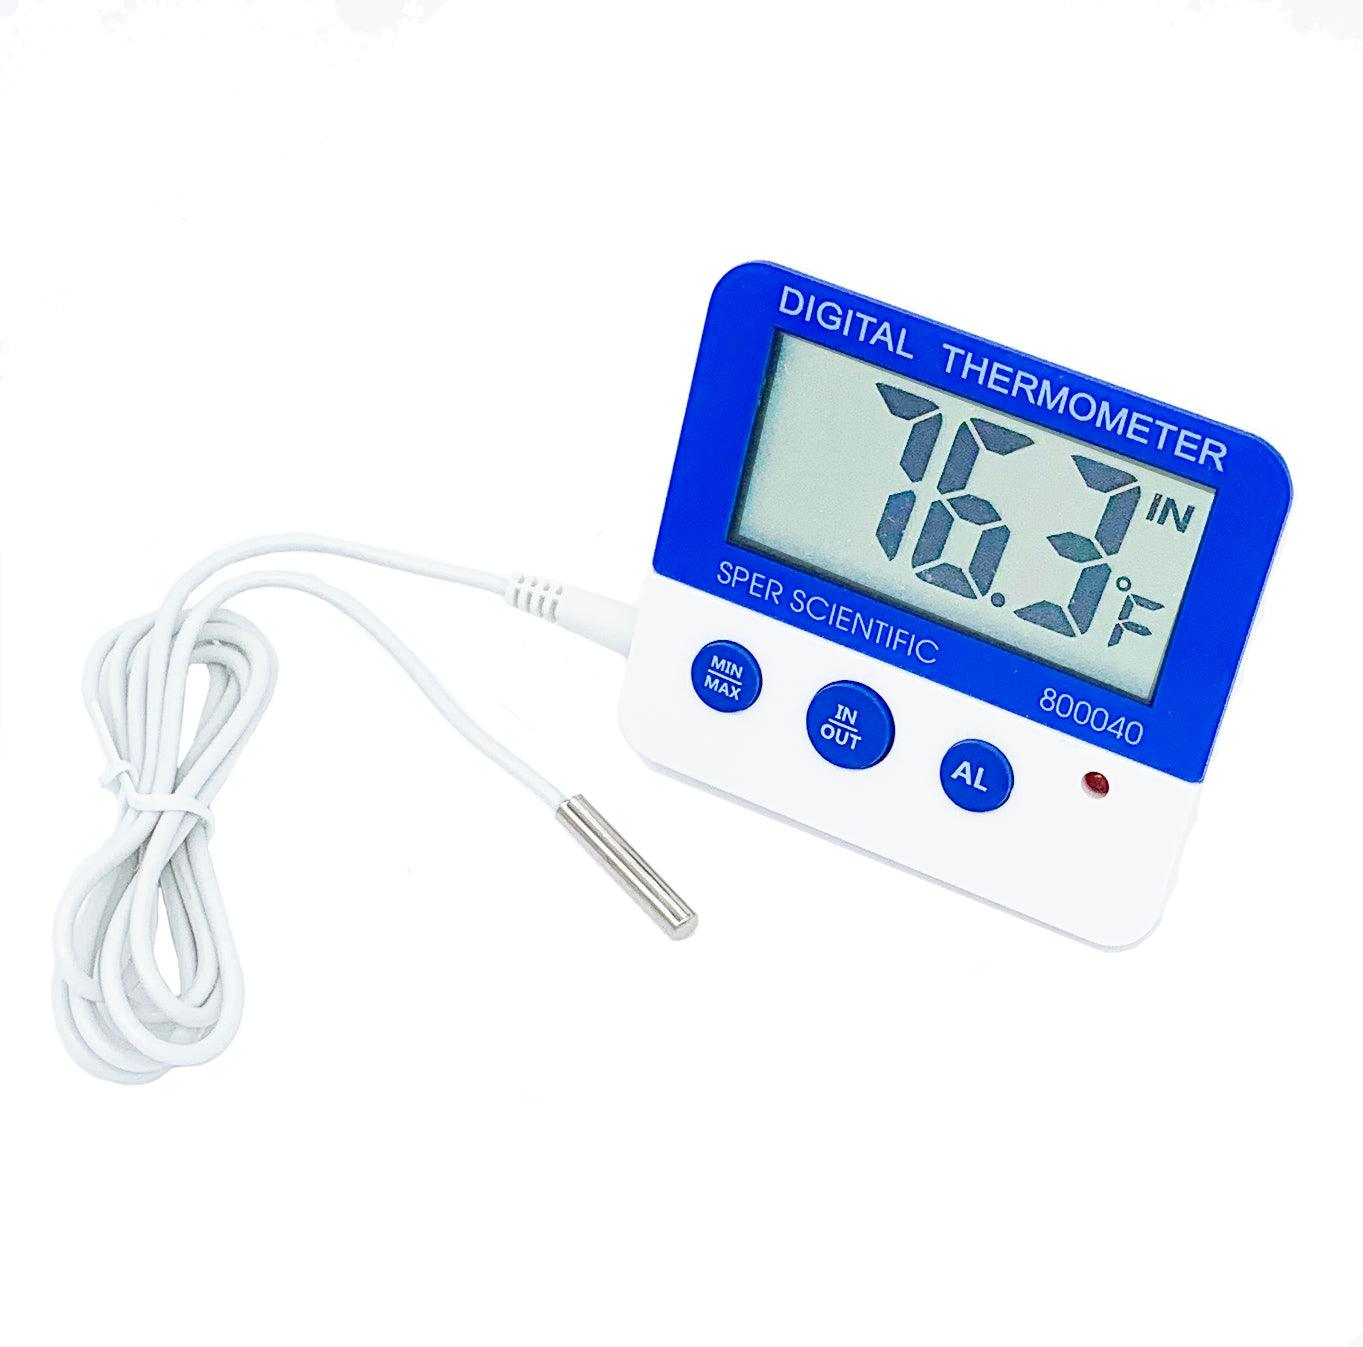 Fridge Thermometer Electric Digital Thermometer Anti-humidity